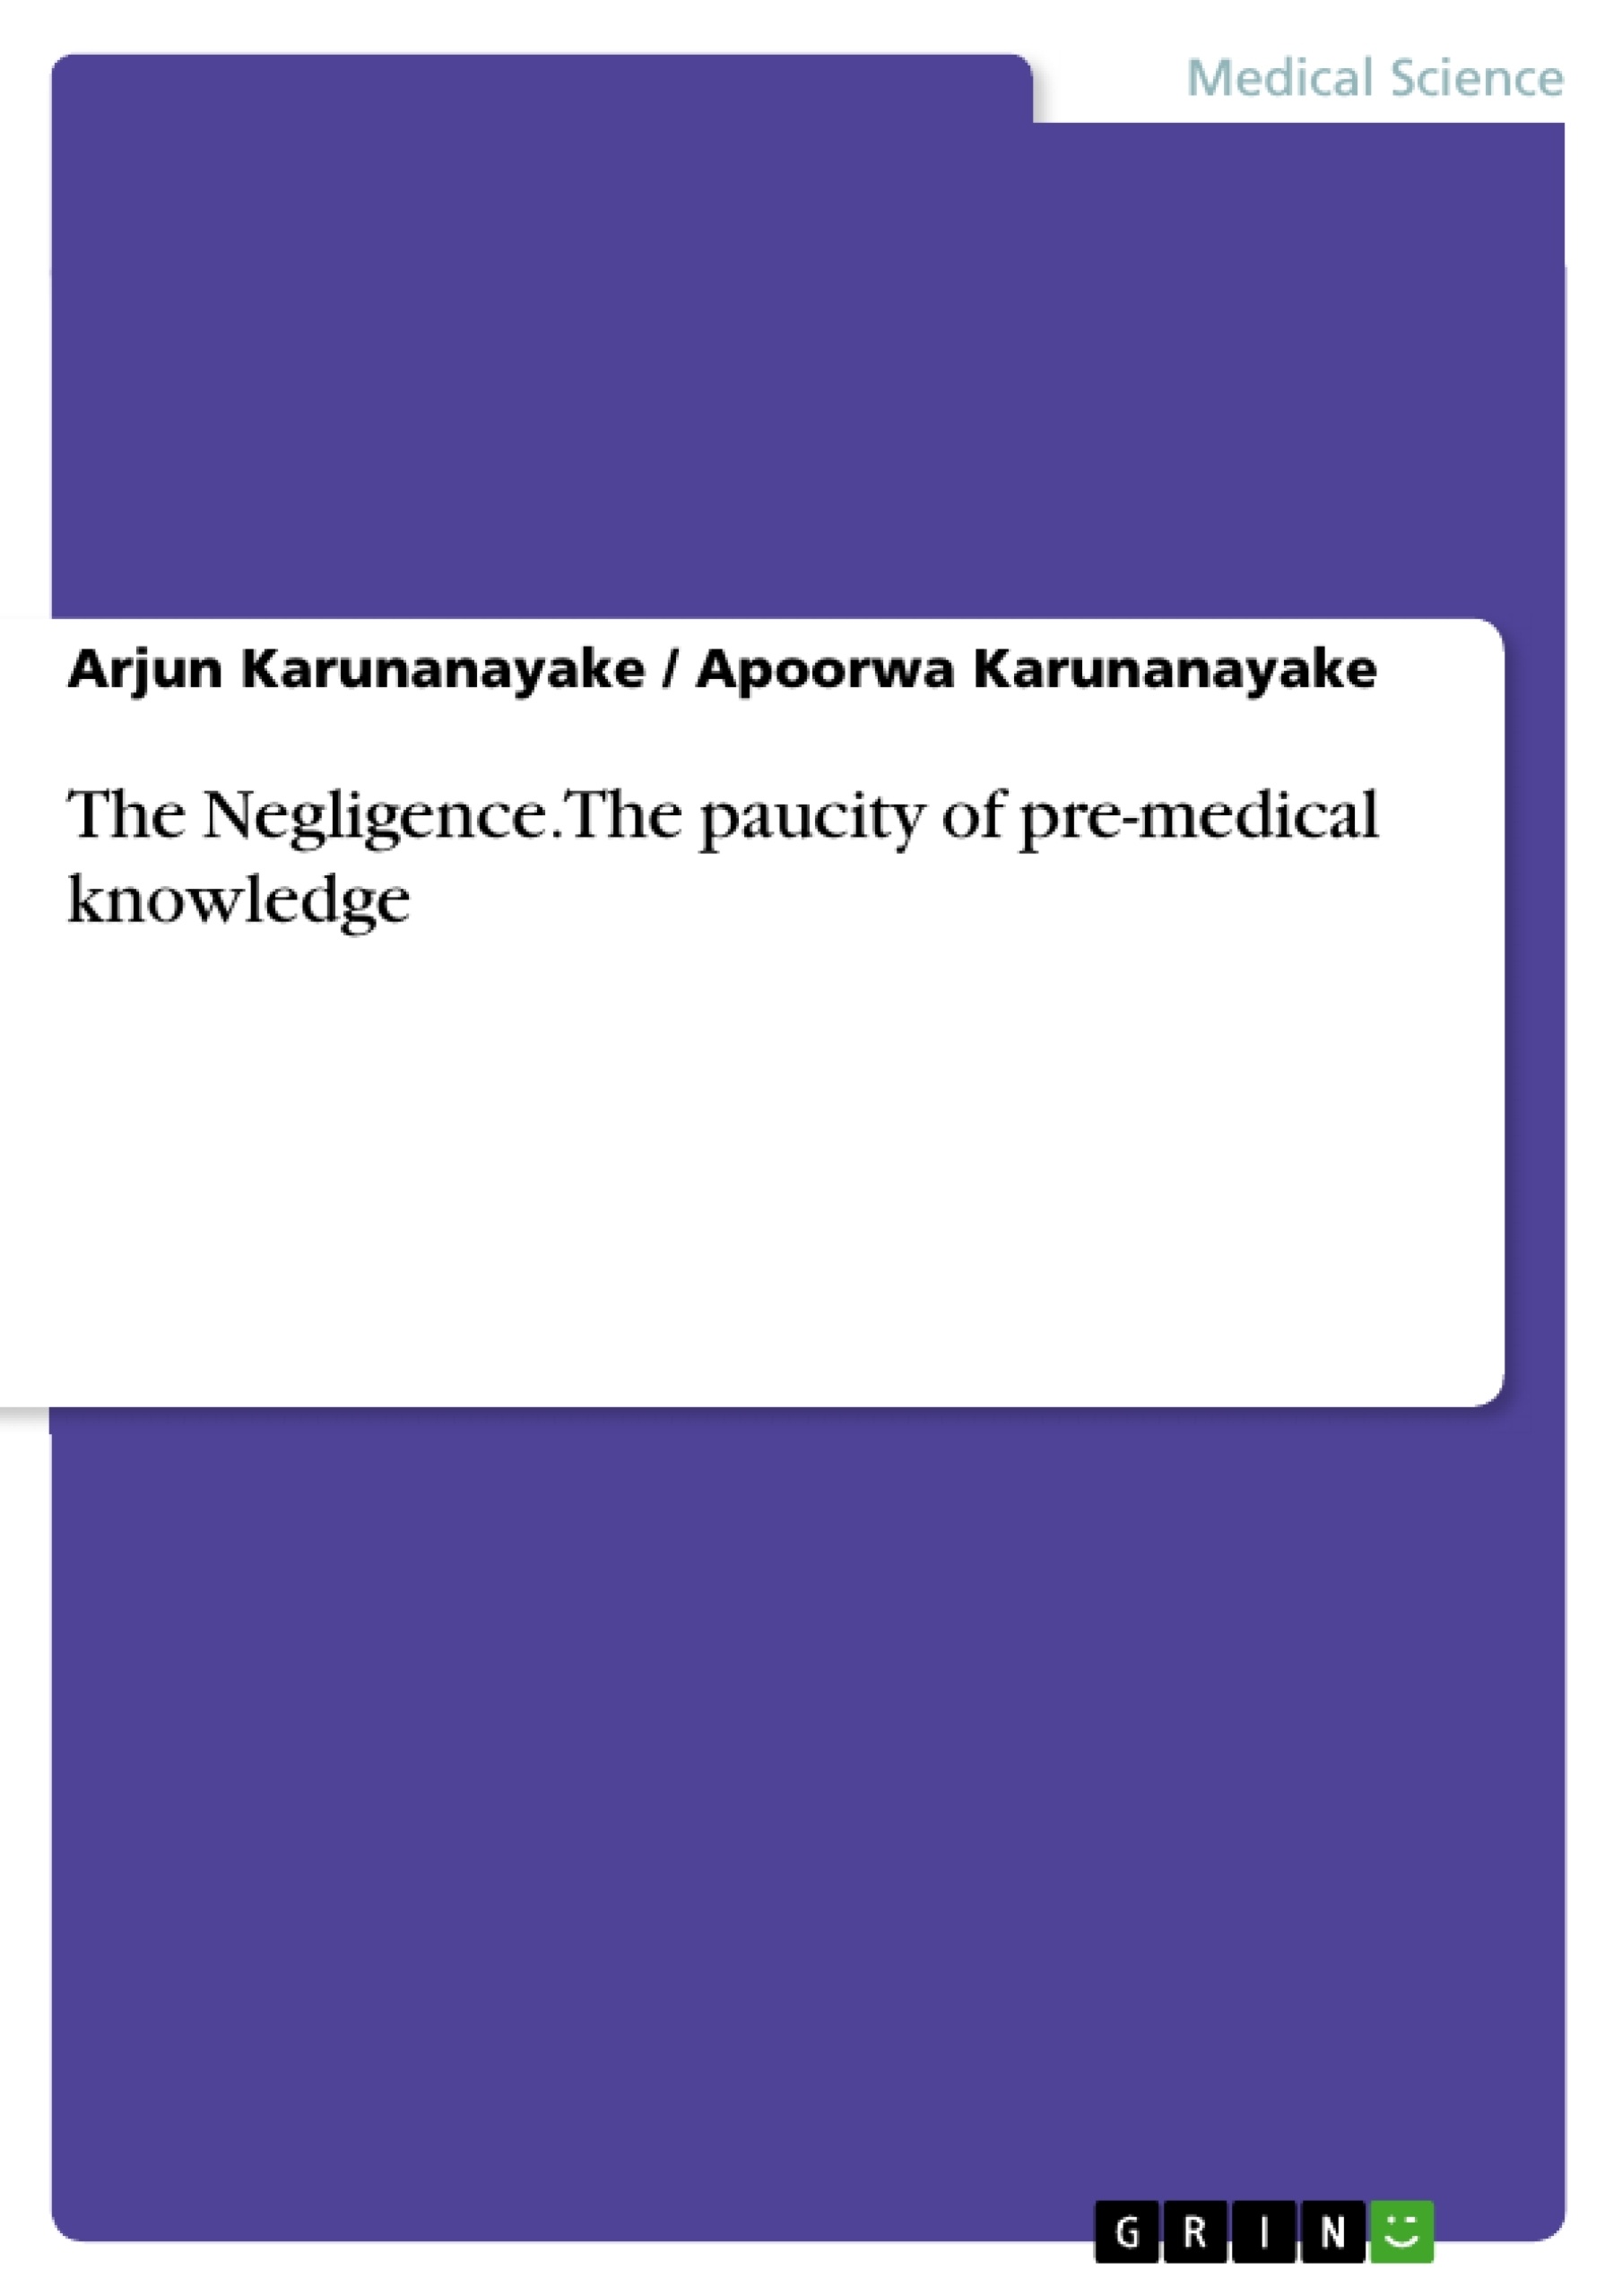 Title: The Negligence. The paucity of pre-medical knowledge